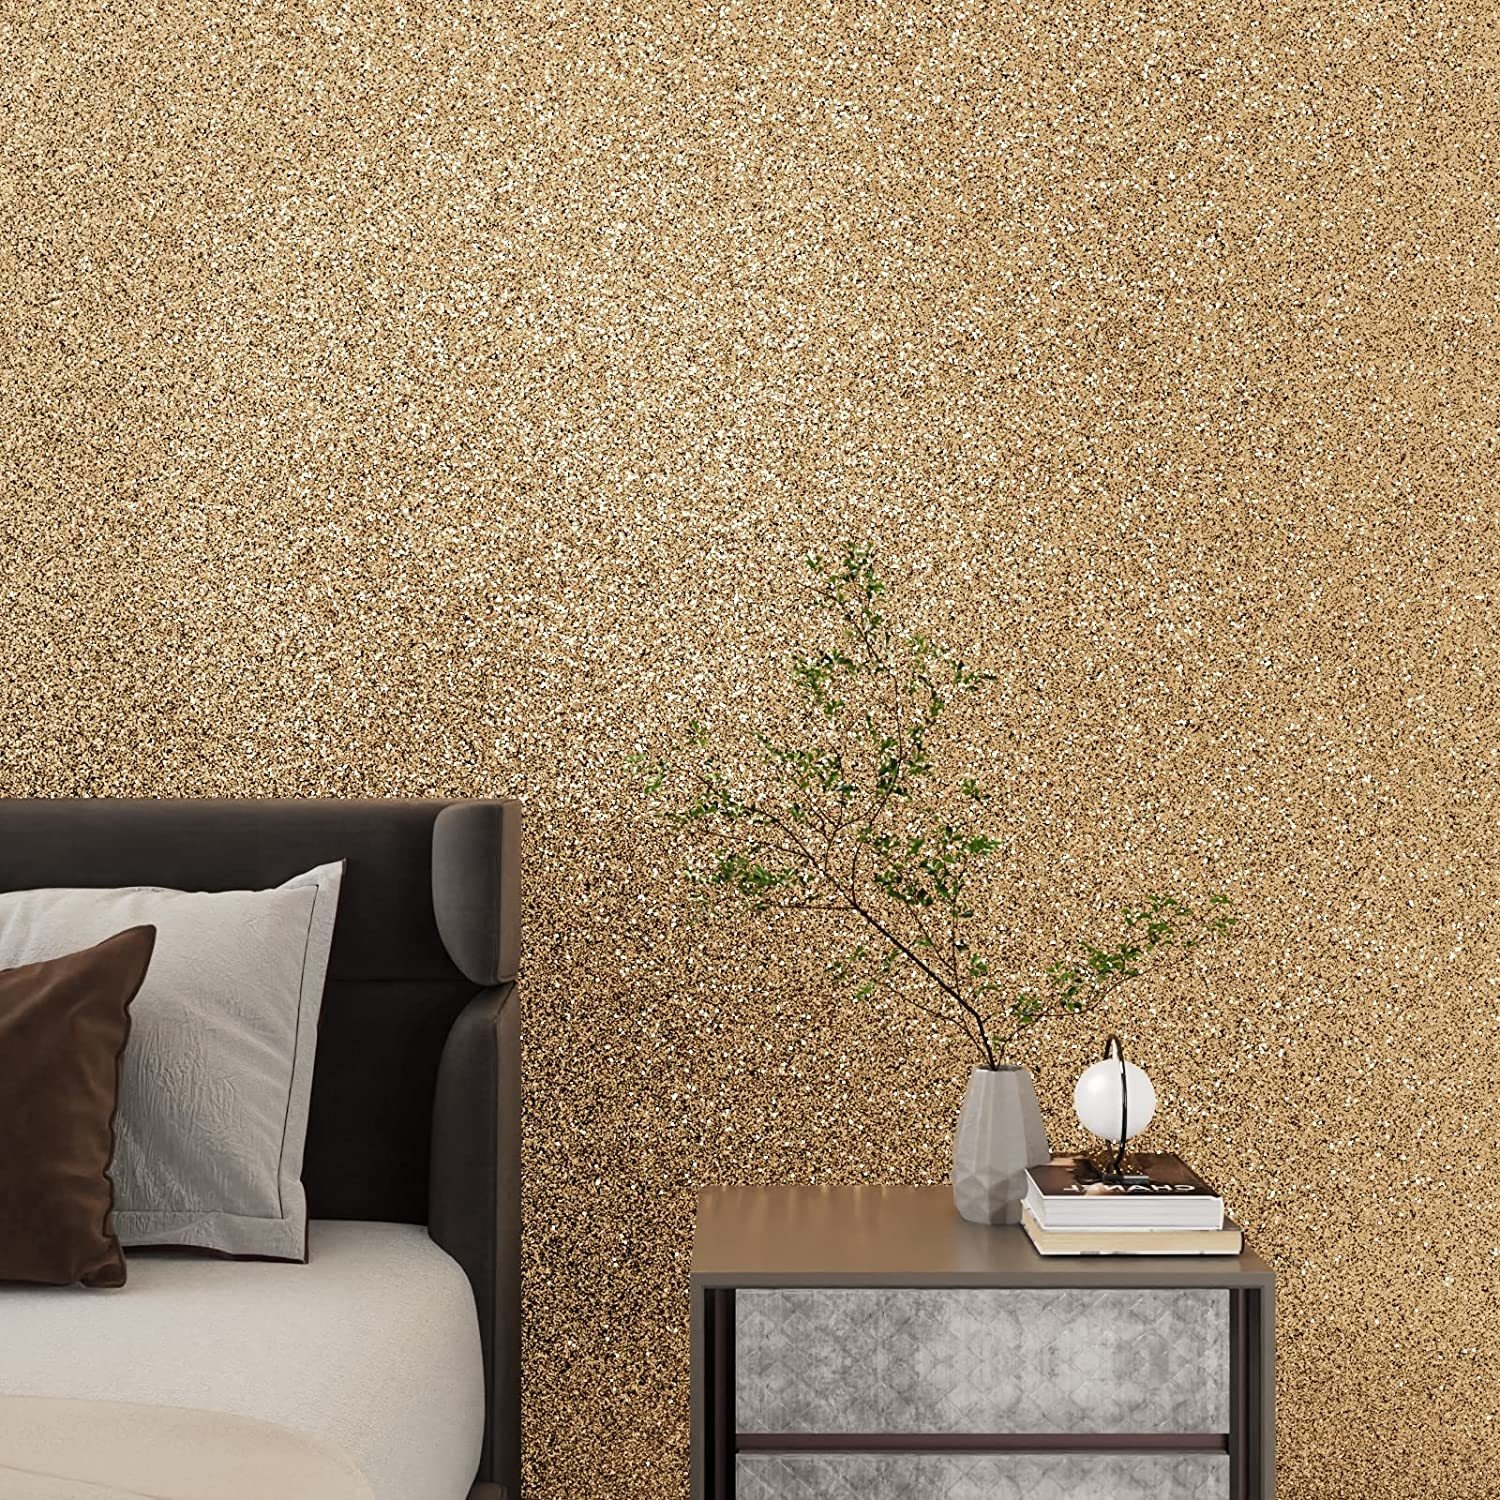 Hopepak Gold Contact Paper 17.7''x118'' Gold Metallic Peel and Stick  Wallpaper Decorative Self Adhesive Removable Waterproof Wallpaper for  Furniture